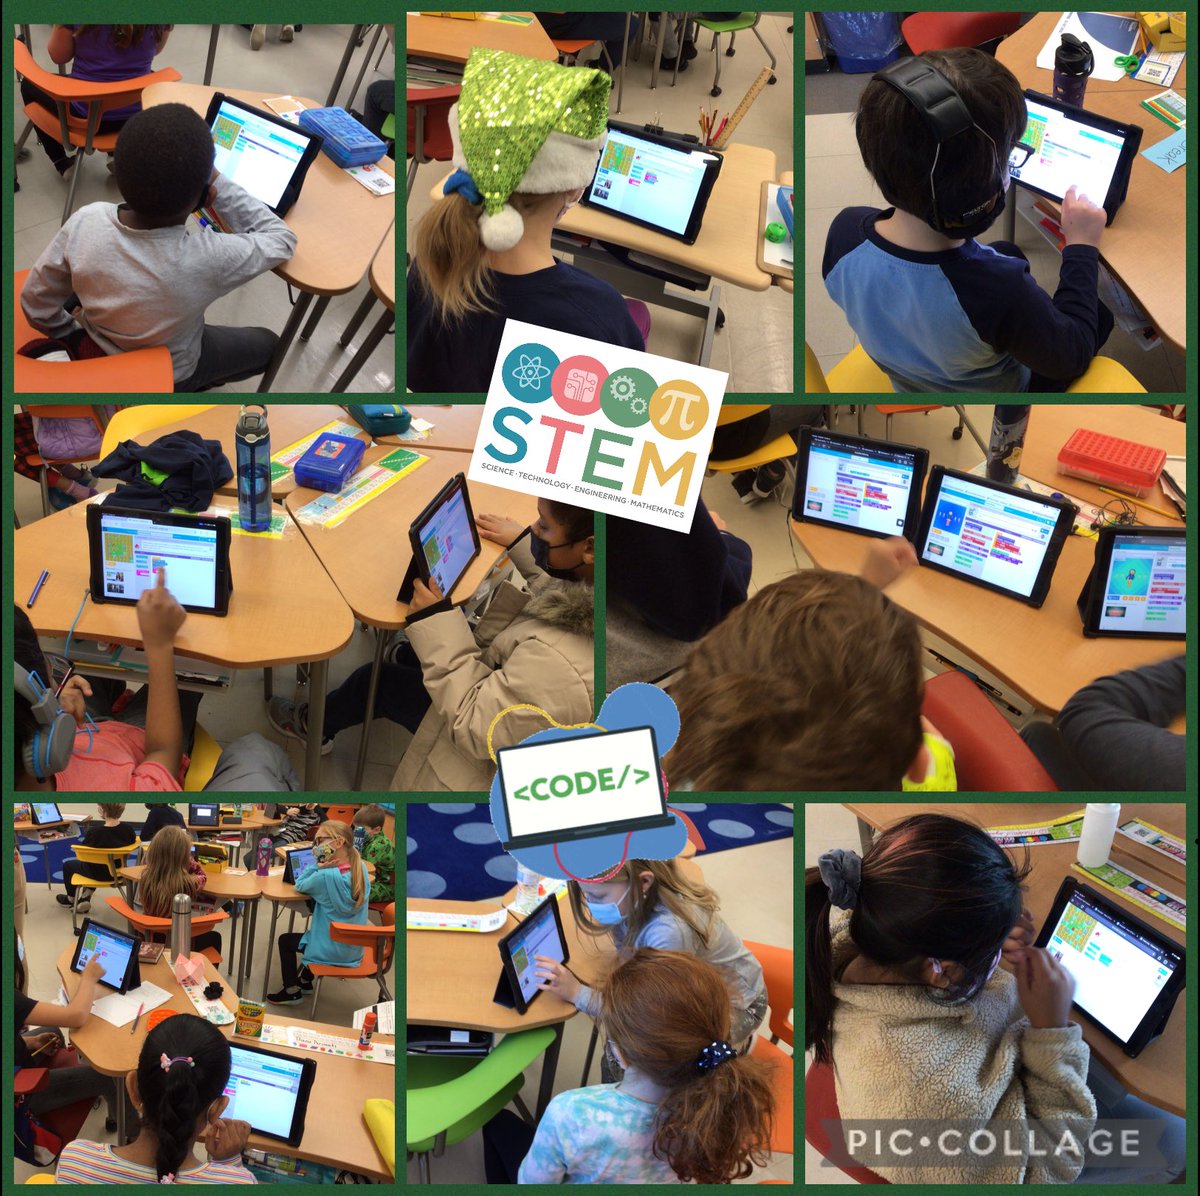 For the past week, students at @GulphPBIS have been participating in the #HourOfCode! They first learned about it in @GulphSTEM and then practiced their skills together with their classmates. #STEM #EveryoneCanCode @kodable @codeorg #csedweek2021 @UpperMerionSD